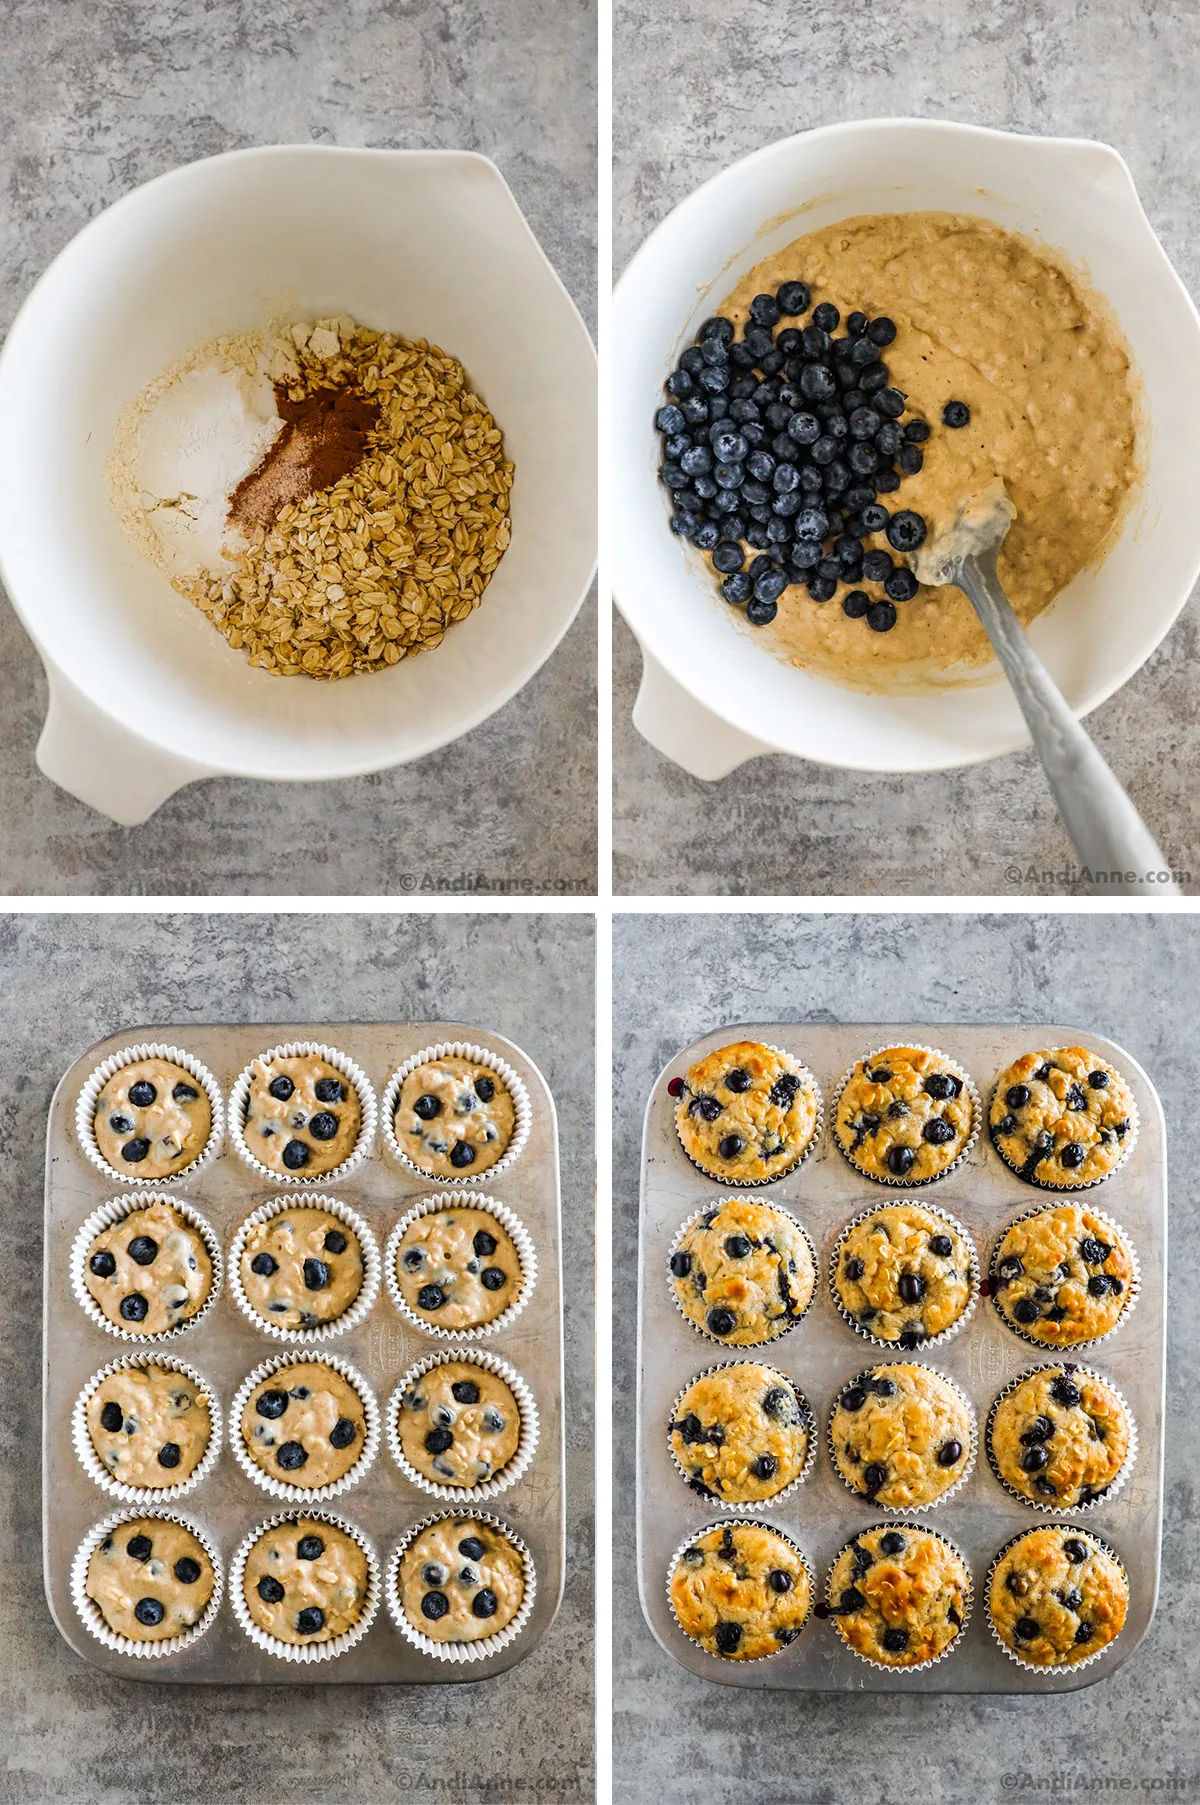 Four images showing steps to make recipe including a bowl of dry ingredients, bowl of batter with blueberries dumped in, unbaked muffins in the muffin tin with paper liners, and bake muffins in the muffin tin.